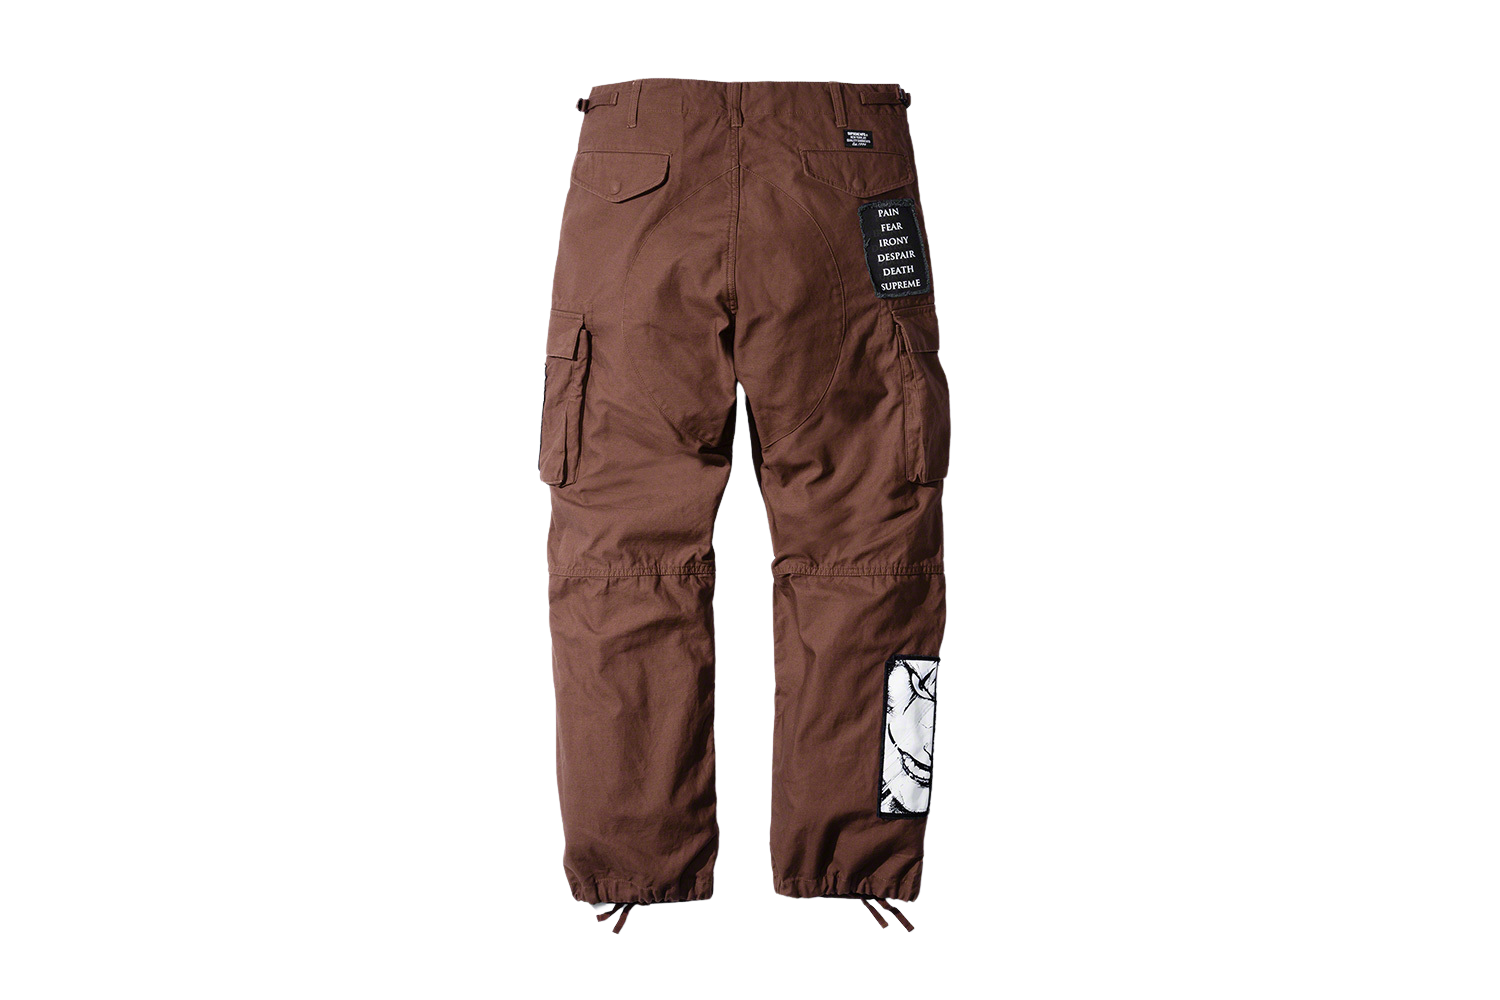 The Crow Cargo Pant - fall winter 2021 - Supreme